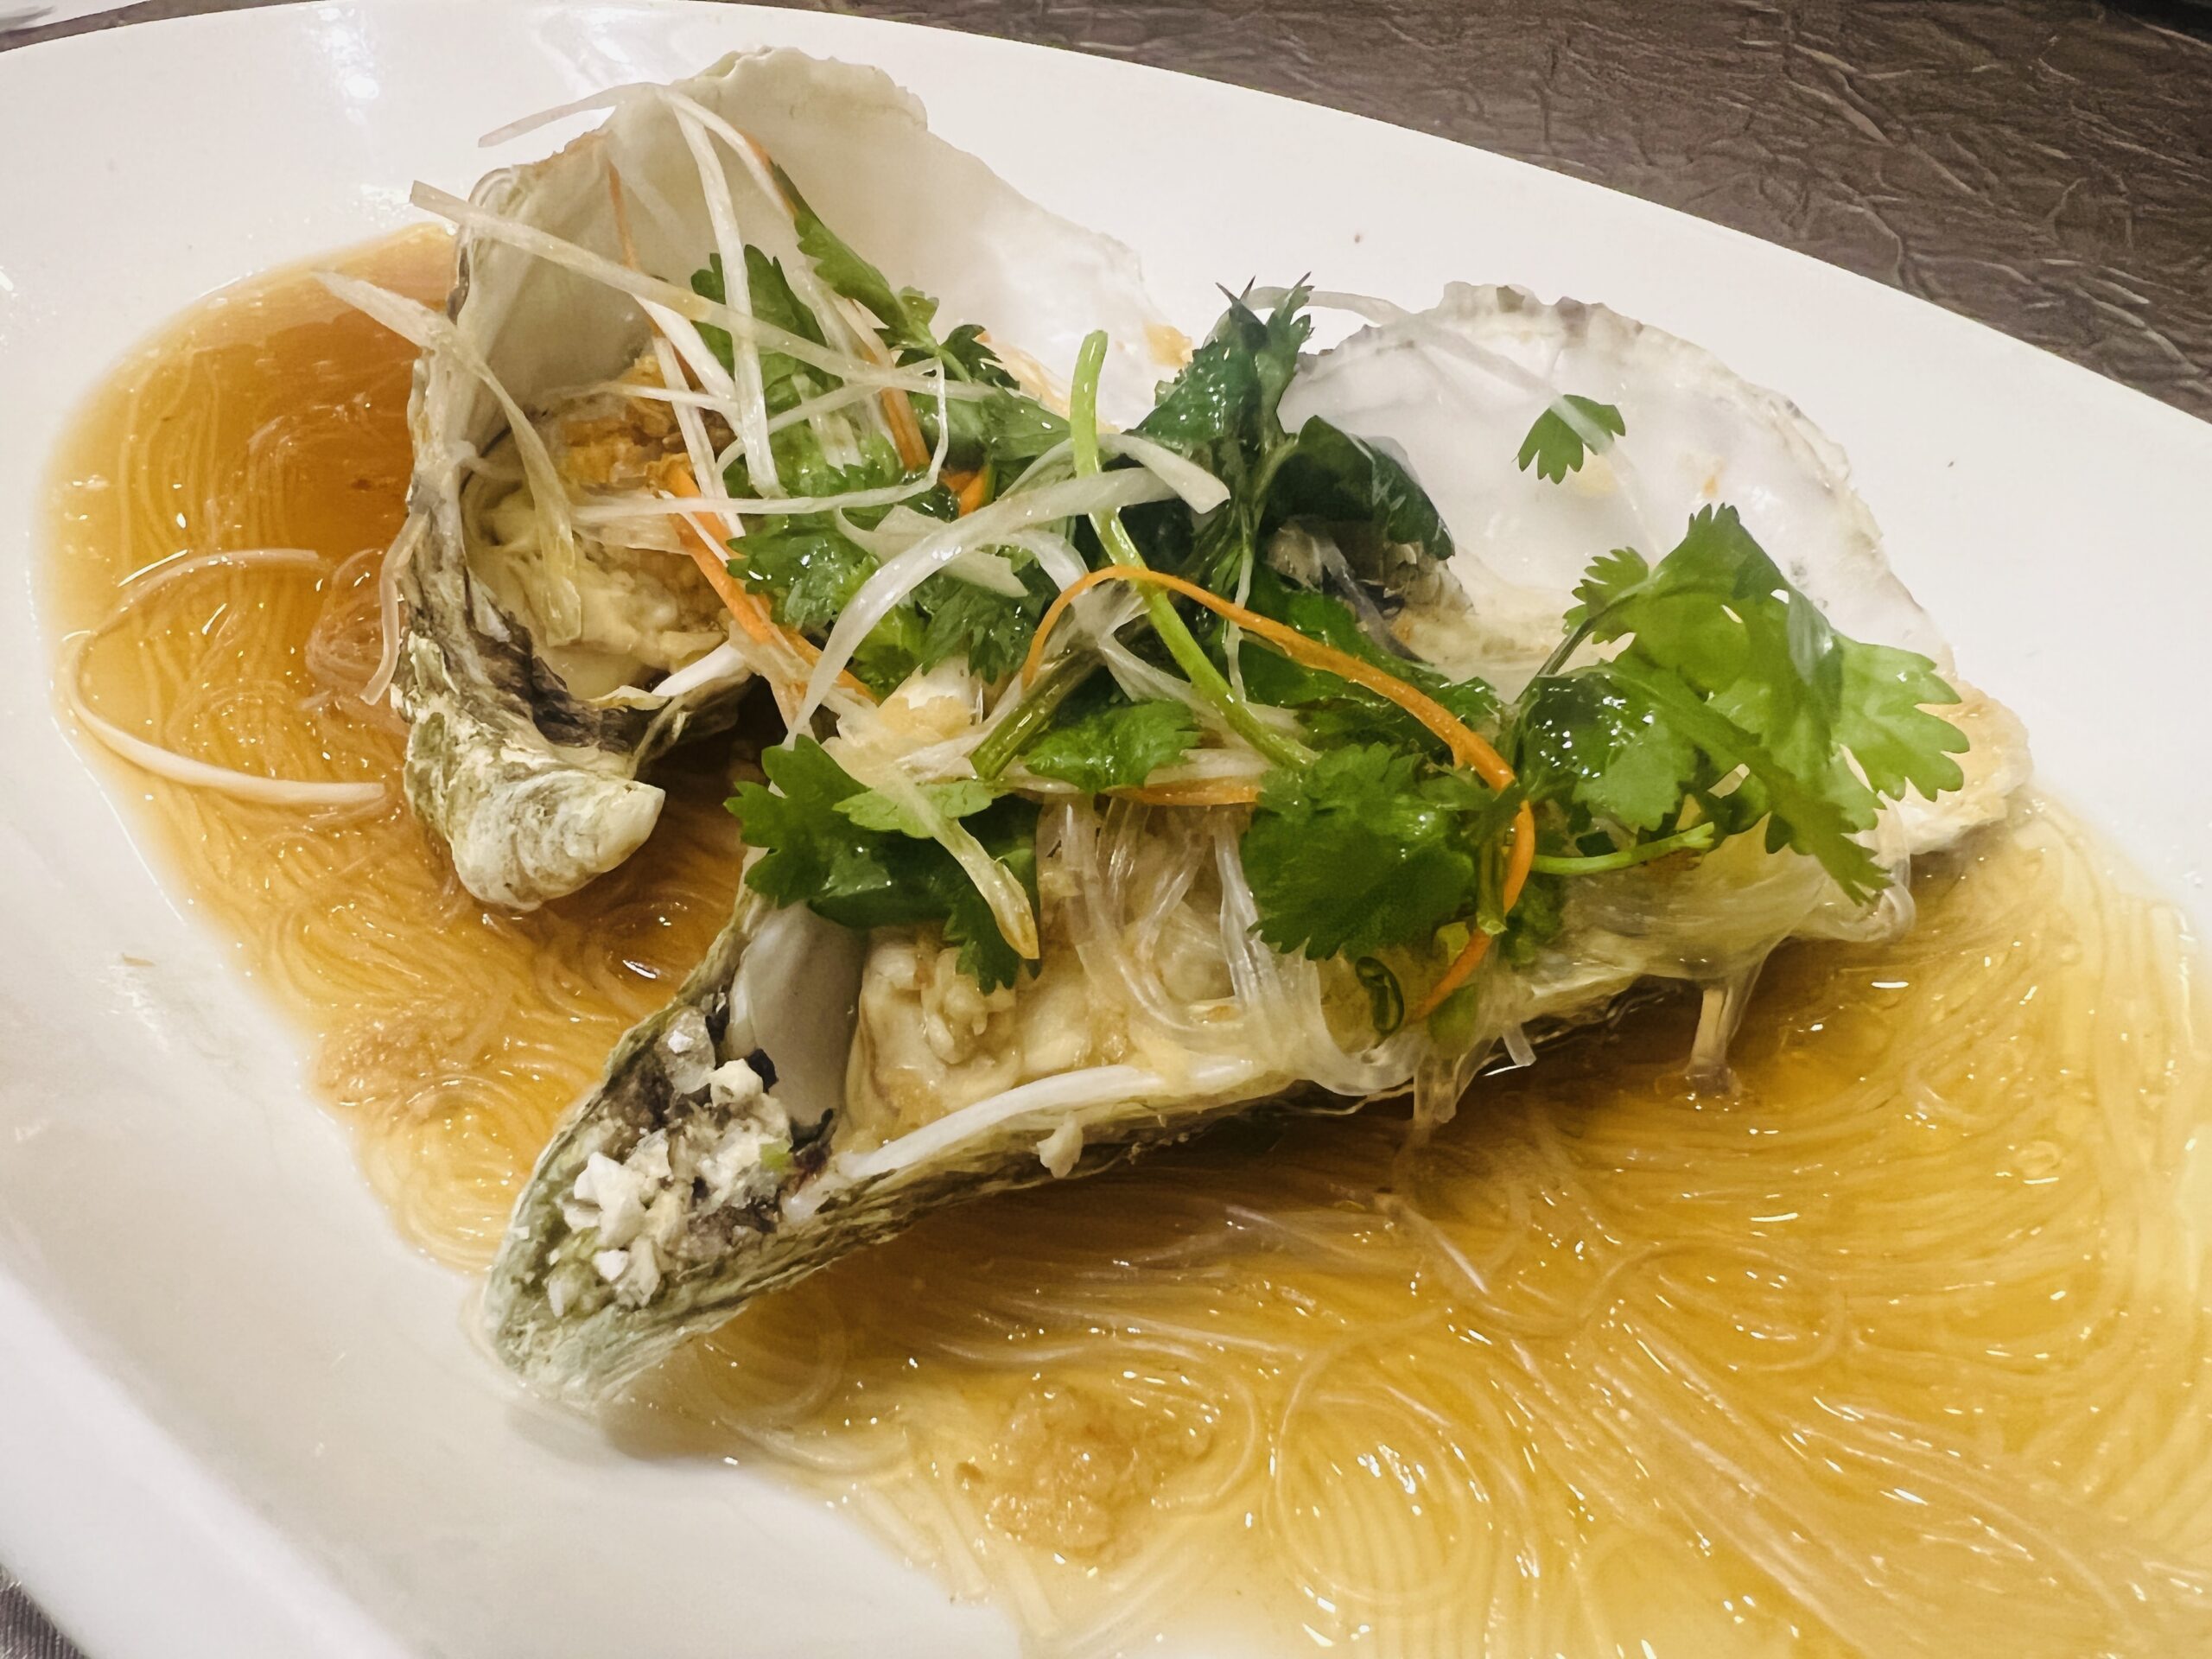 Chin Huat Live Seafood - Live Oyster